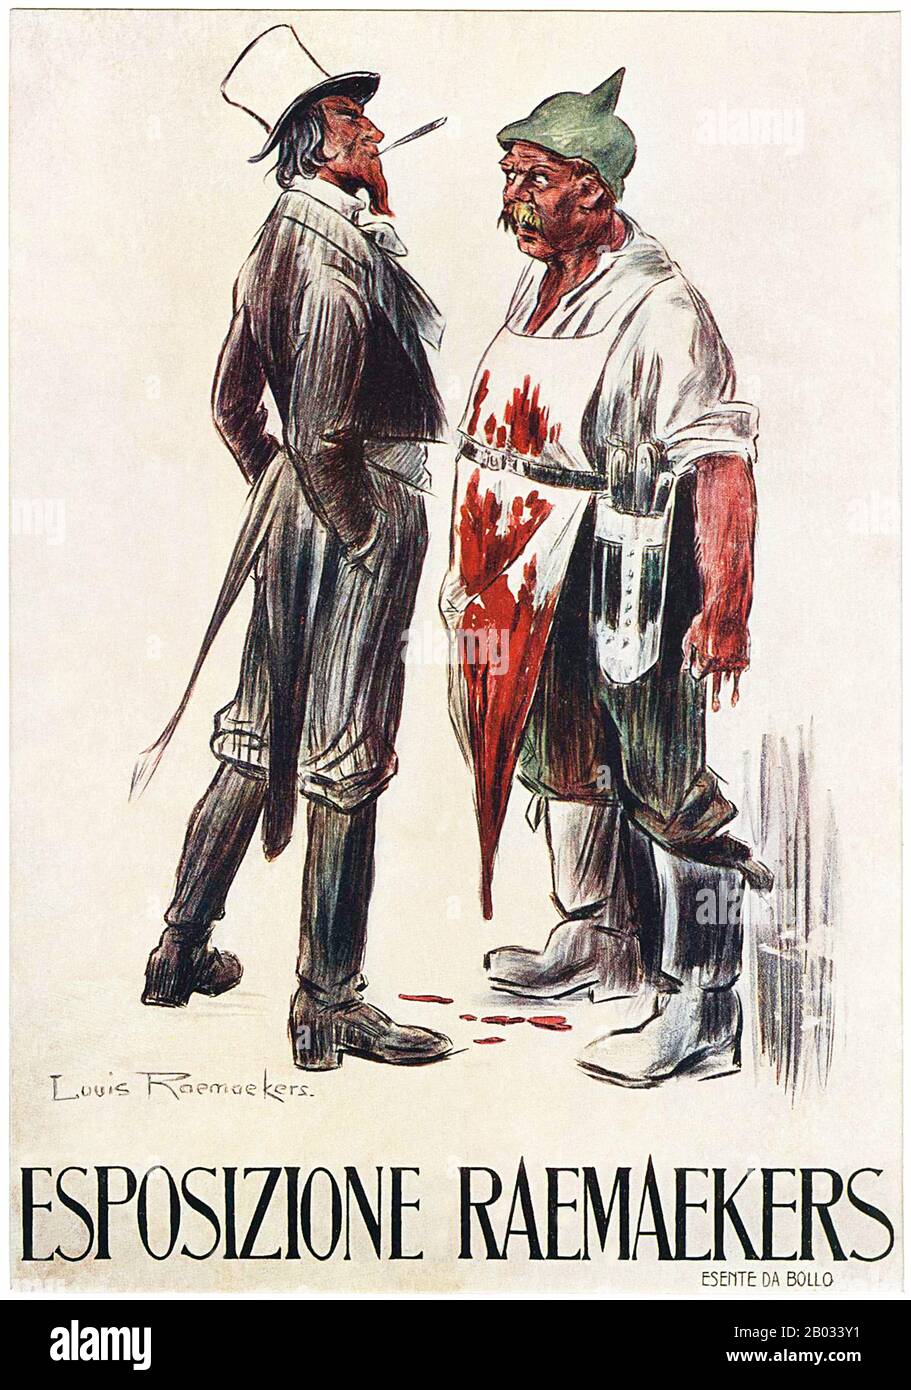 Louis Raemaekers (April 6, 1869 – July 26, 1956) was a Dutch painter and editorial cartoonist for the Amsterdam newspaper De Telegraaf during World War I, noted for his anti-German stance. Stock Photo